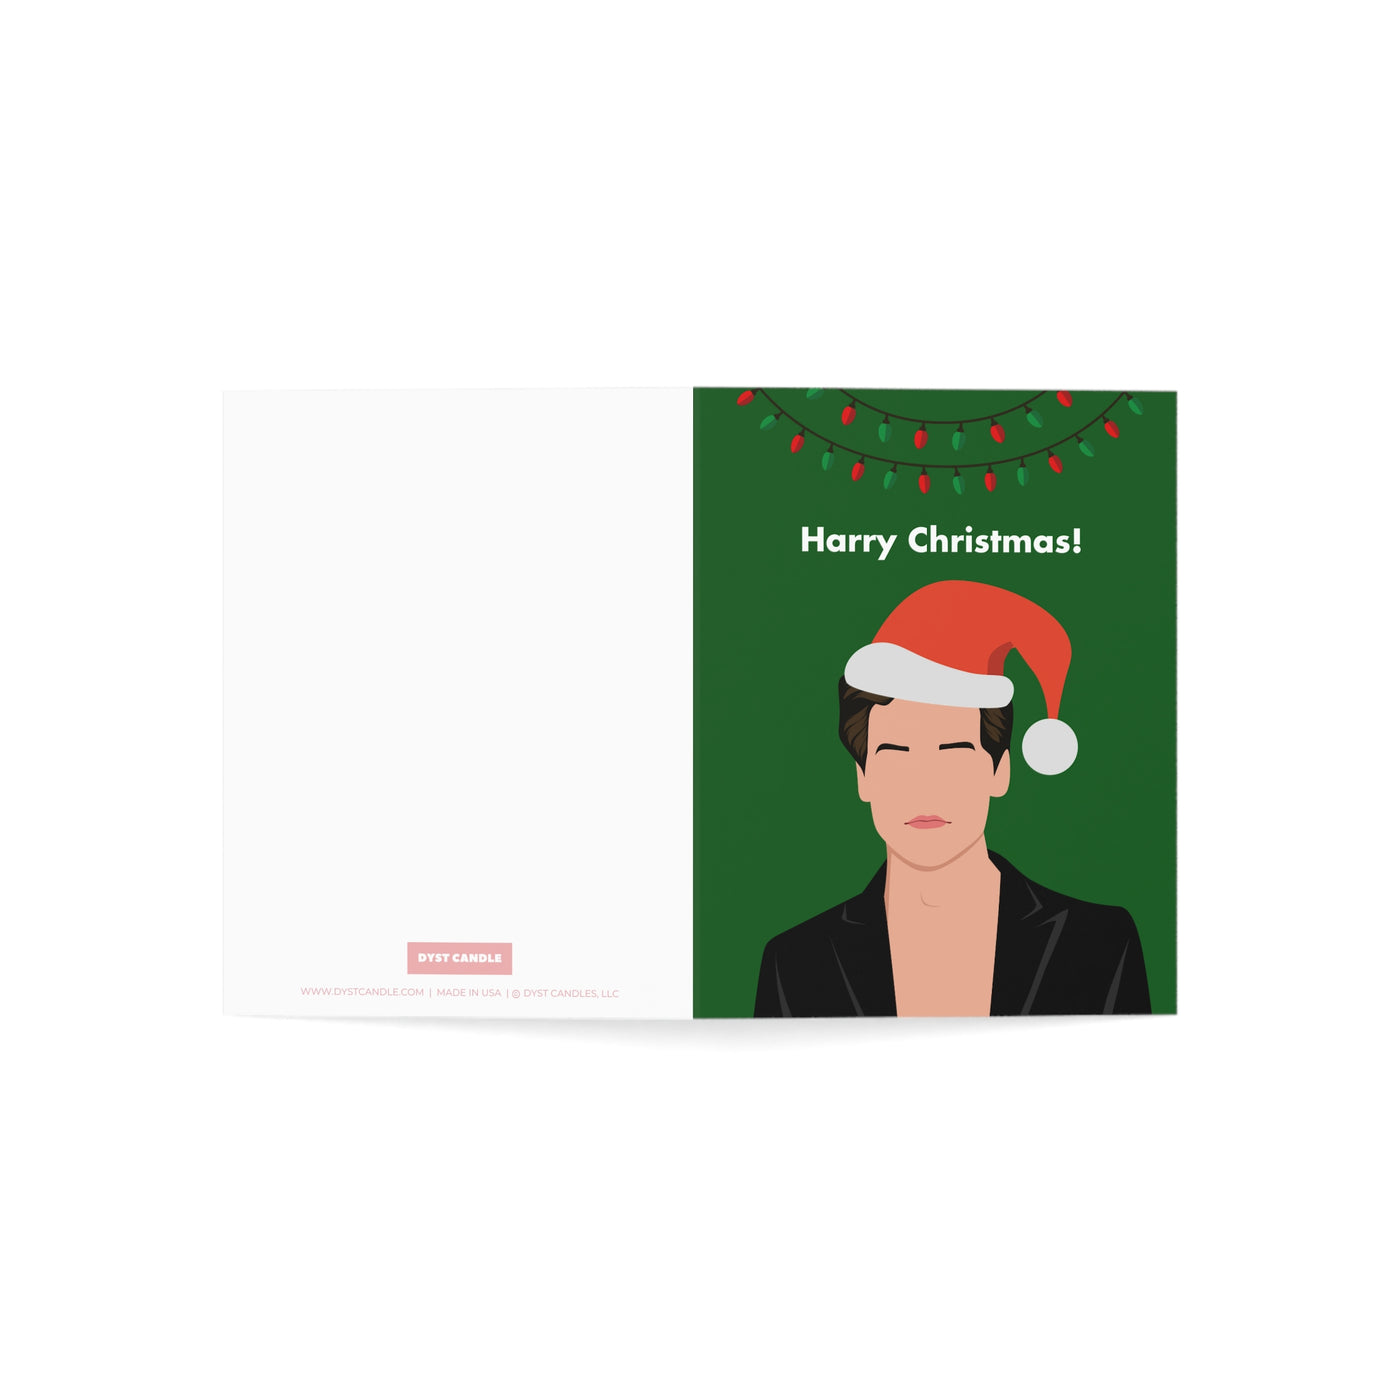 The Harry - Harry Christmas Holiday Greeting Card